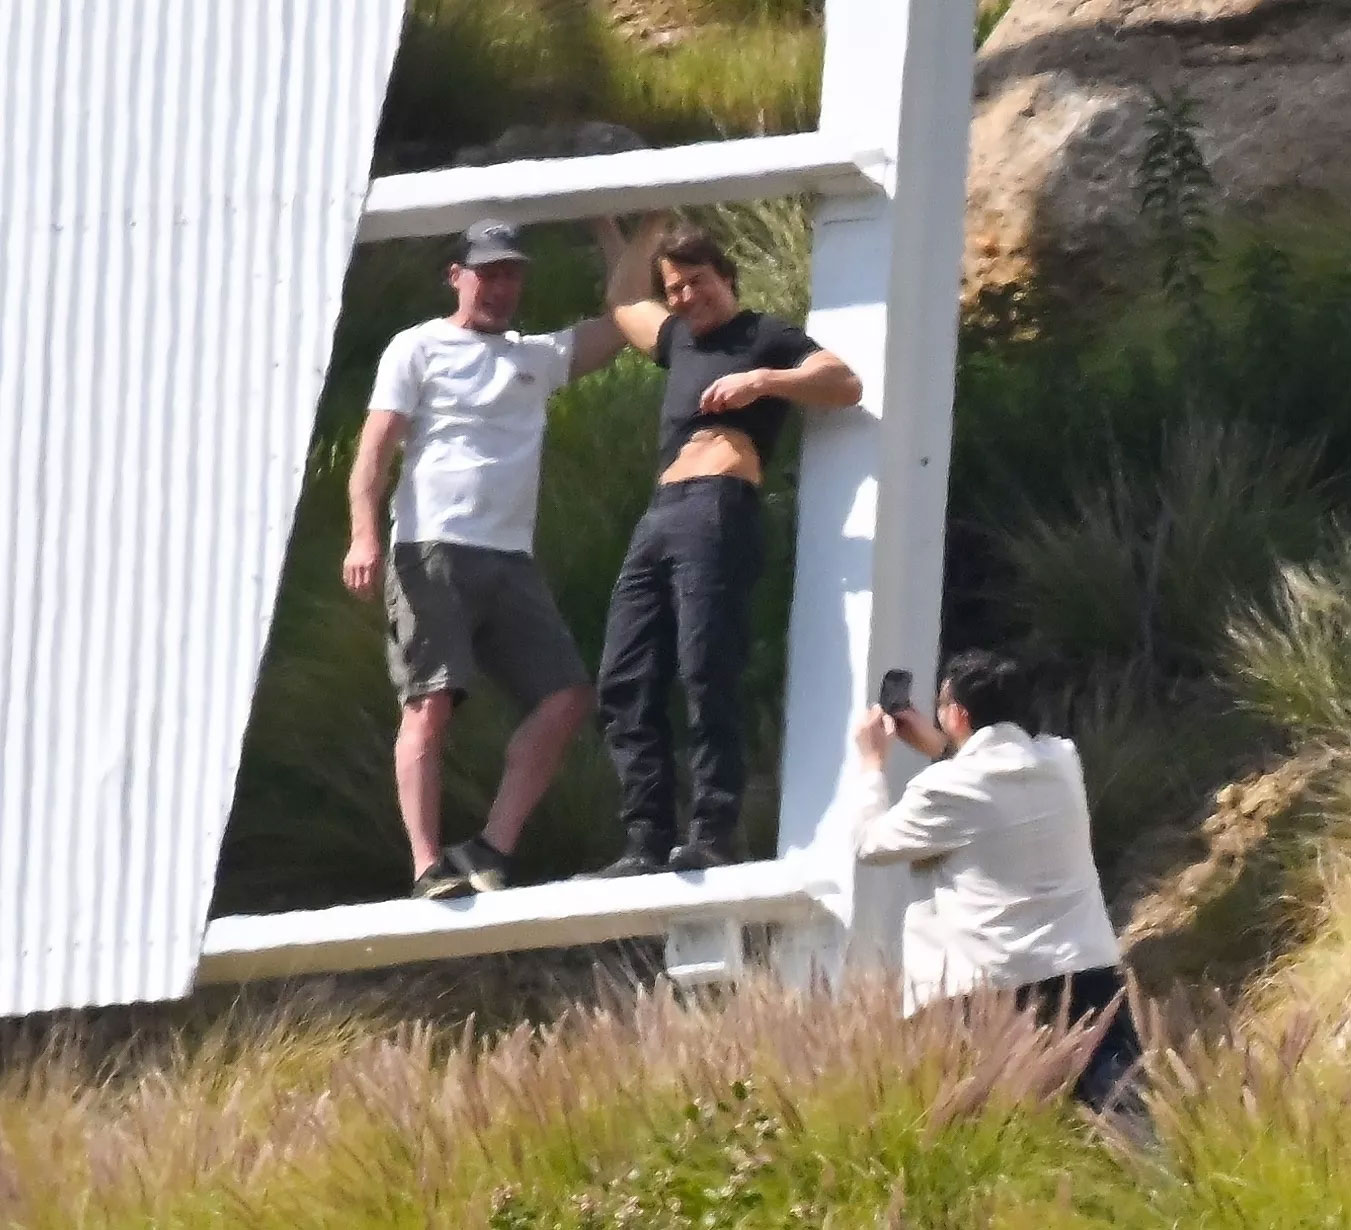 New photo shows Tom Cruise embarks on wildest mission at landmark site?